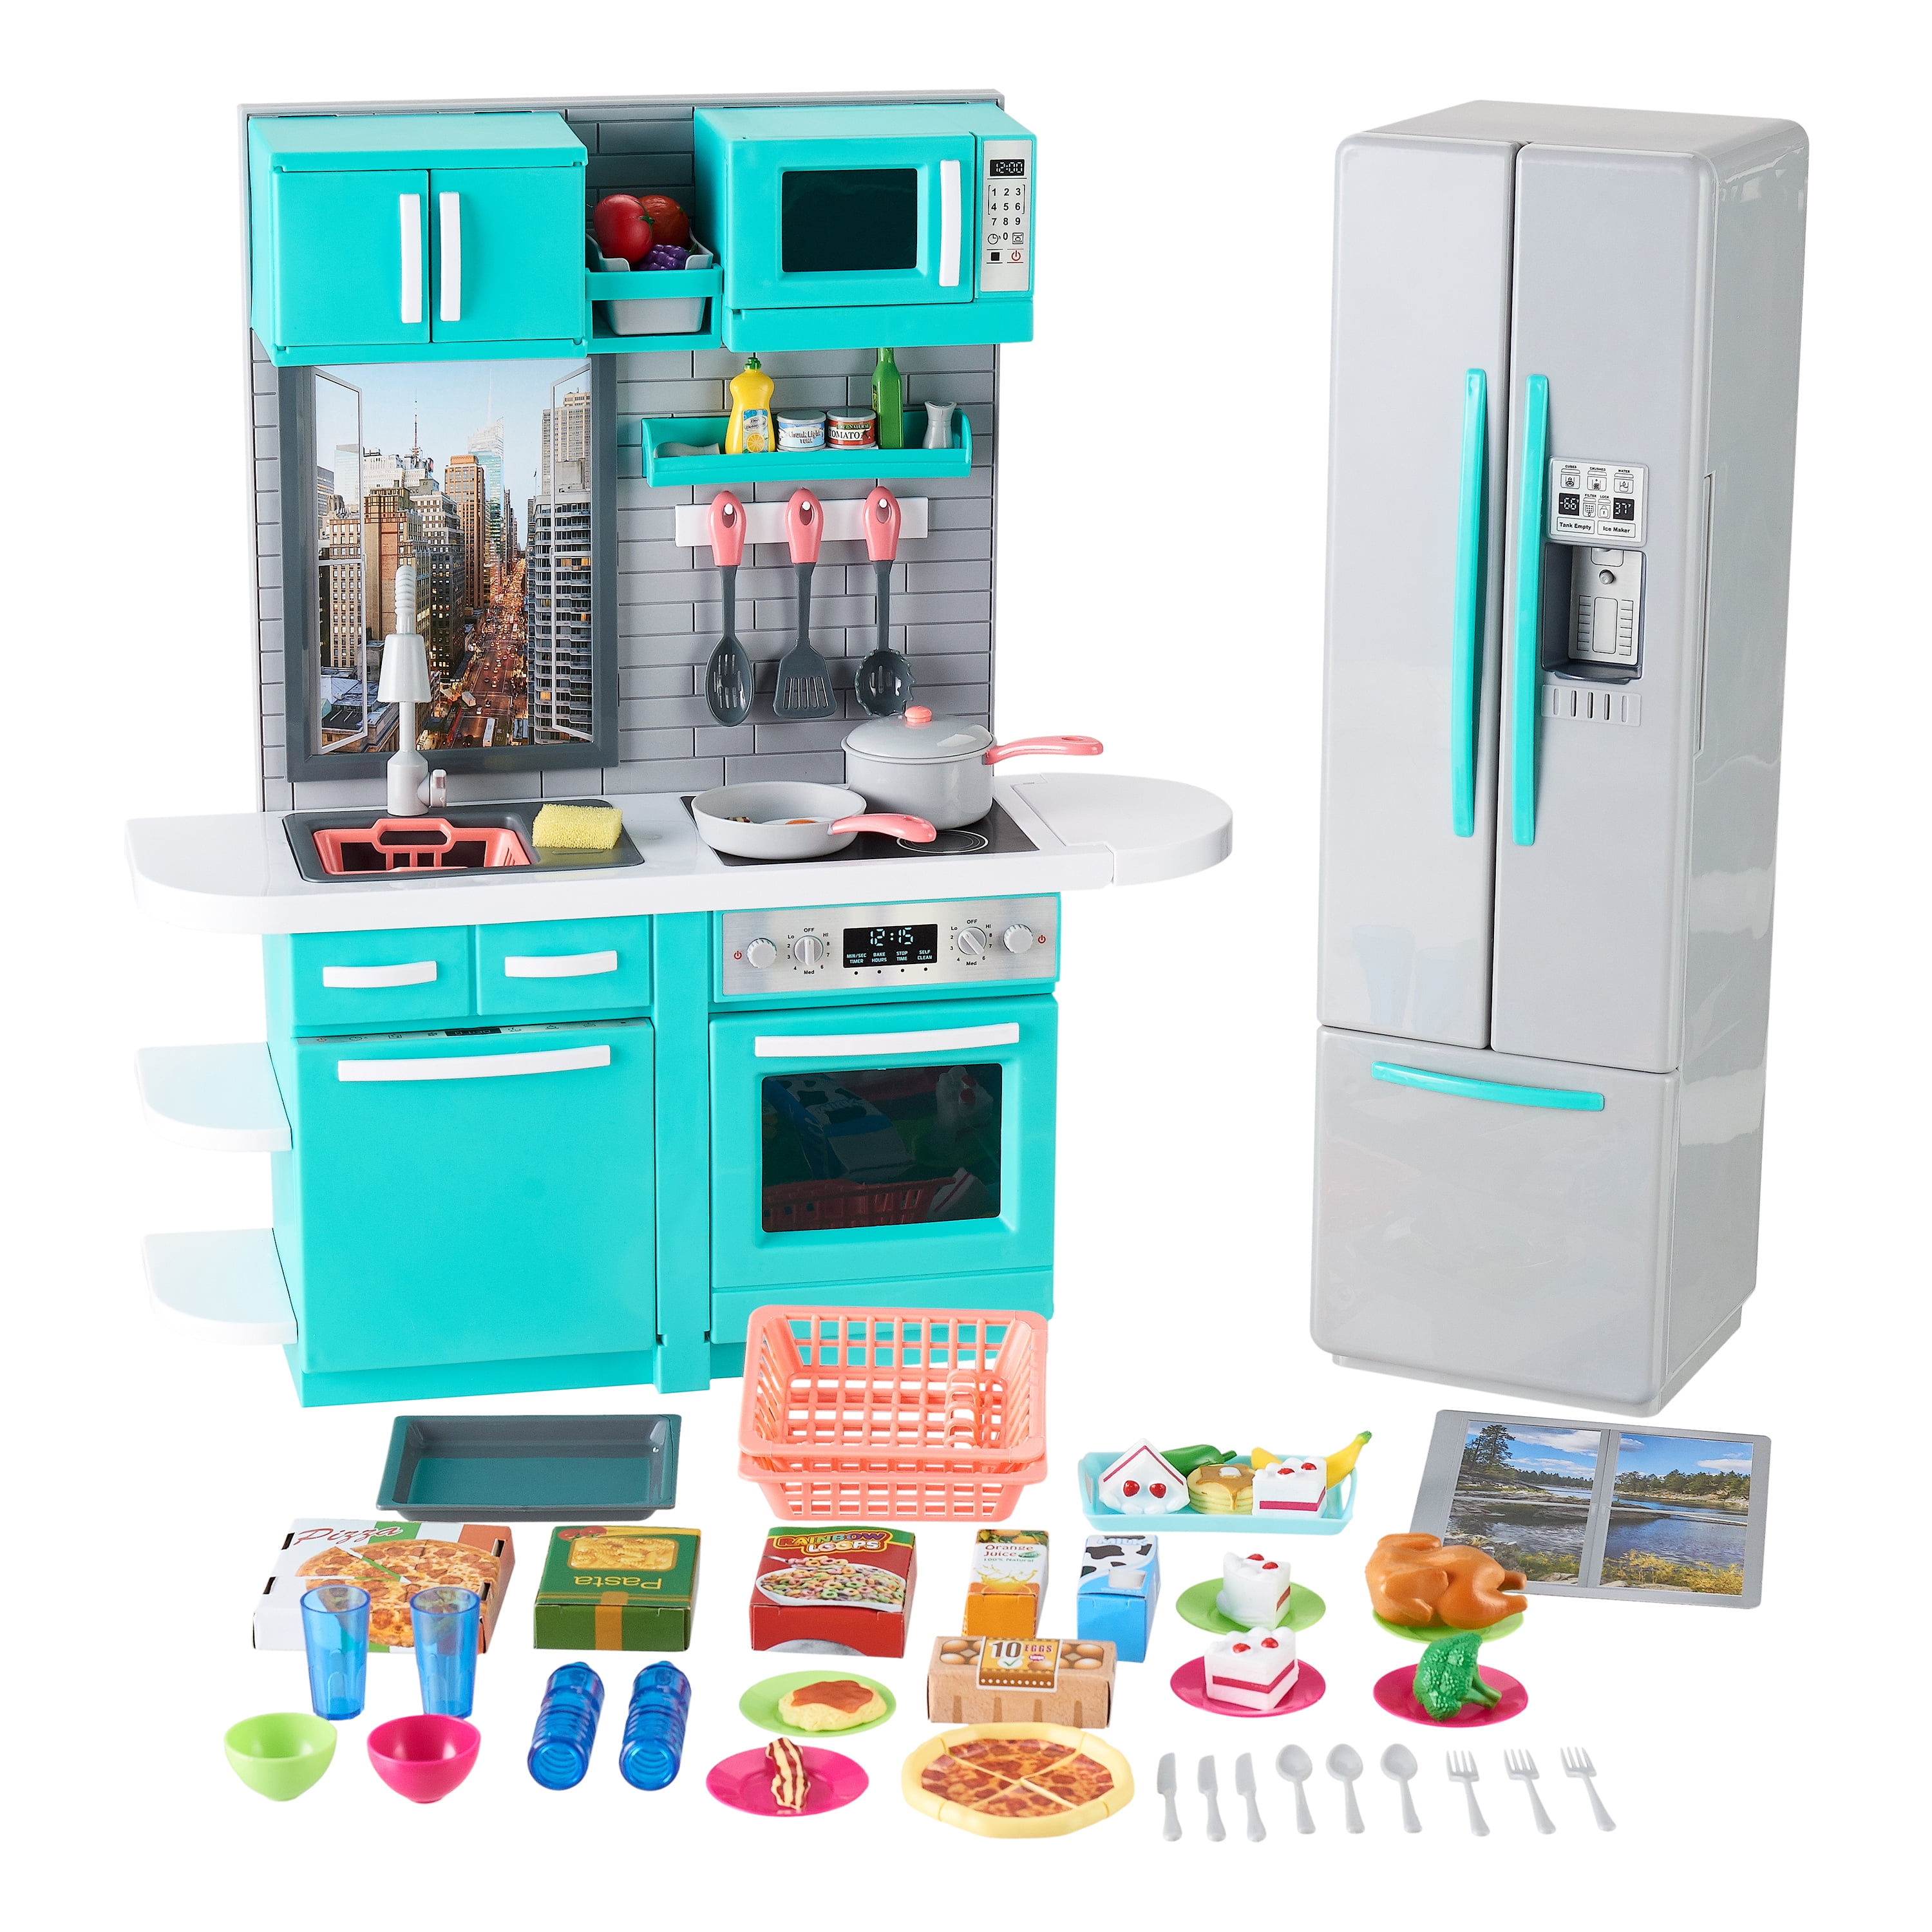 My Life As Kitchen Play Set for My Life 